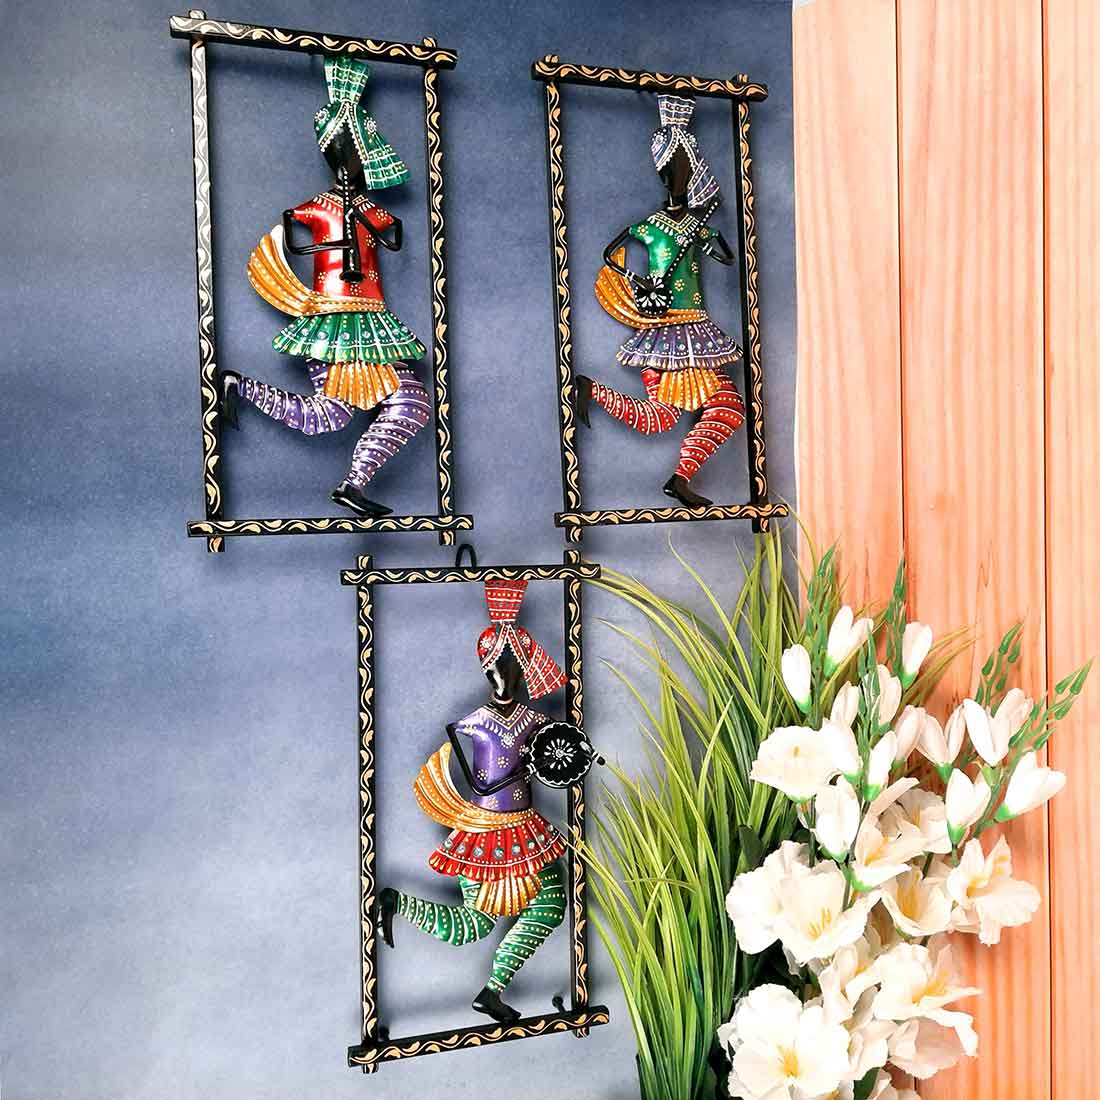 Products Musician Wall Hanging - For Home Decor & Gifts - 13 Inch - apkamart